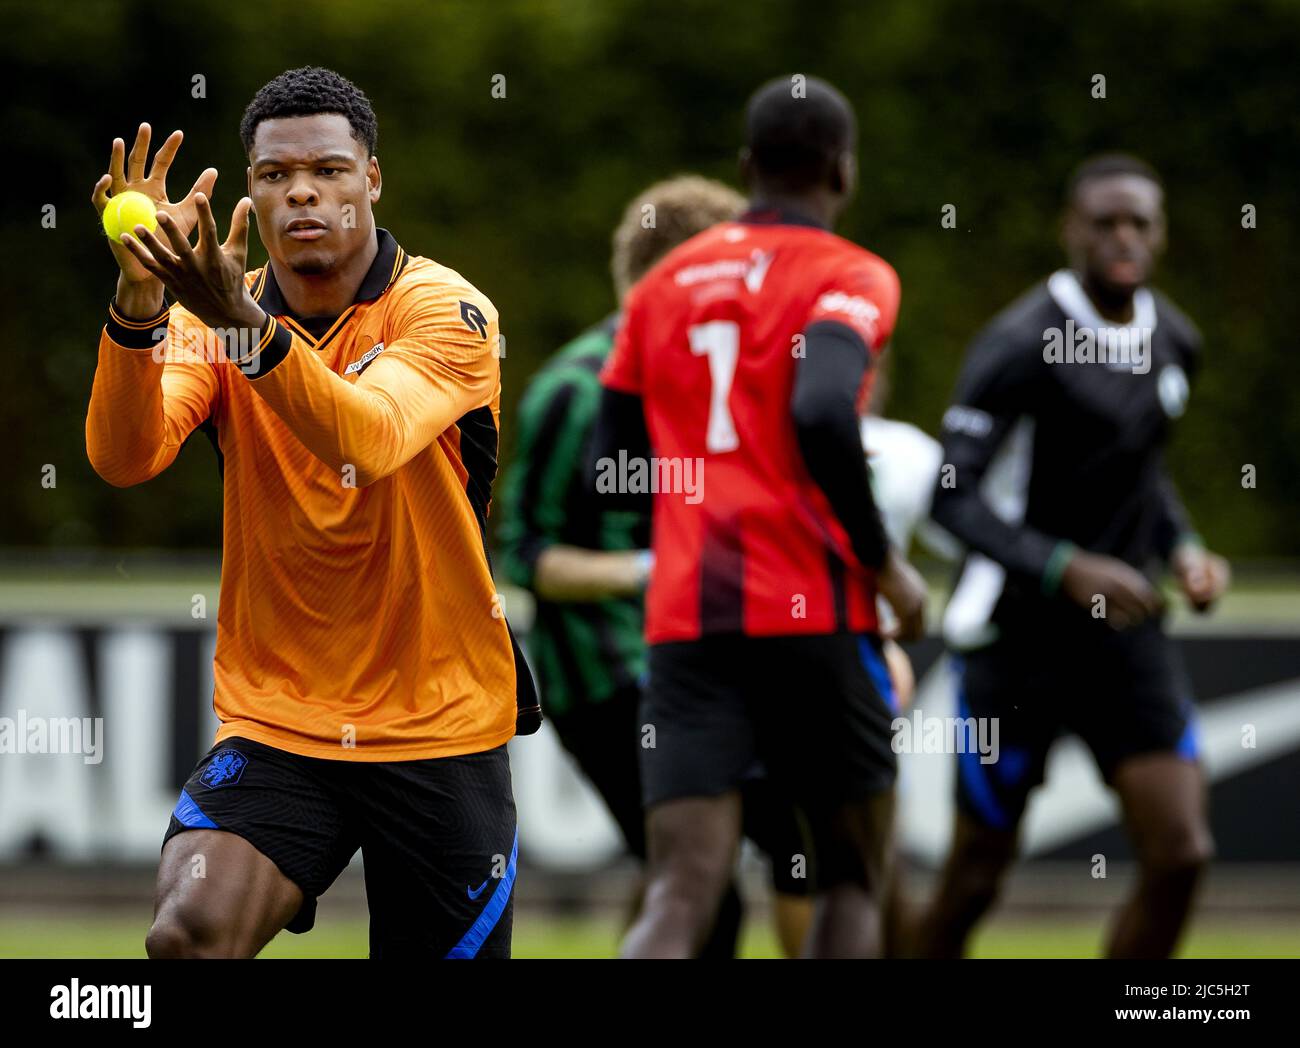 2022-06-10 12:11:24 ZEIST - Denzel Dumfries of the Dutch national team wears  the shirt of his former amateur club during the warm-up for the training.  With this ode to the amateur shirt,